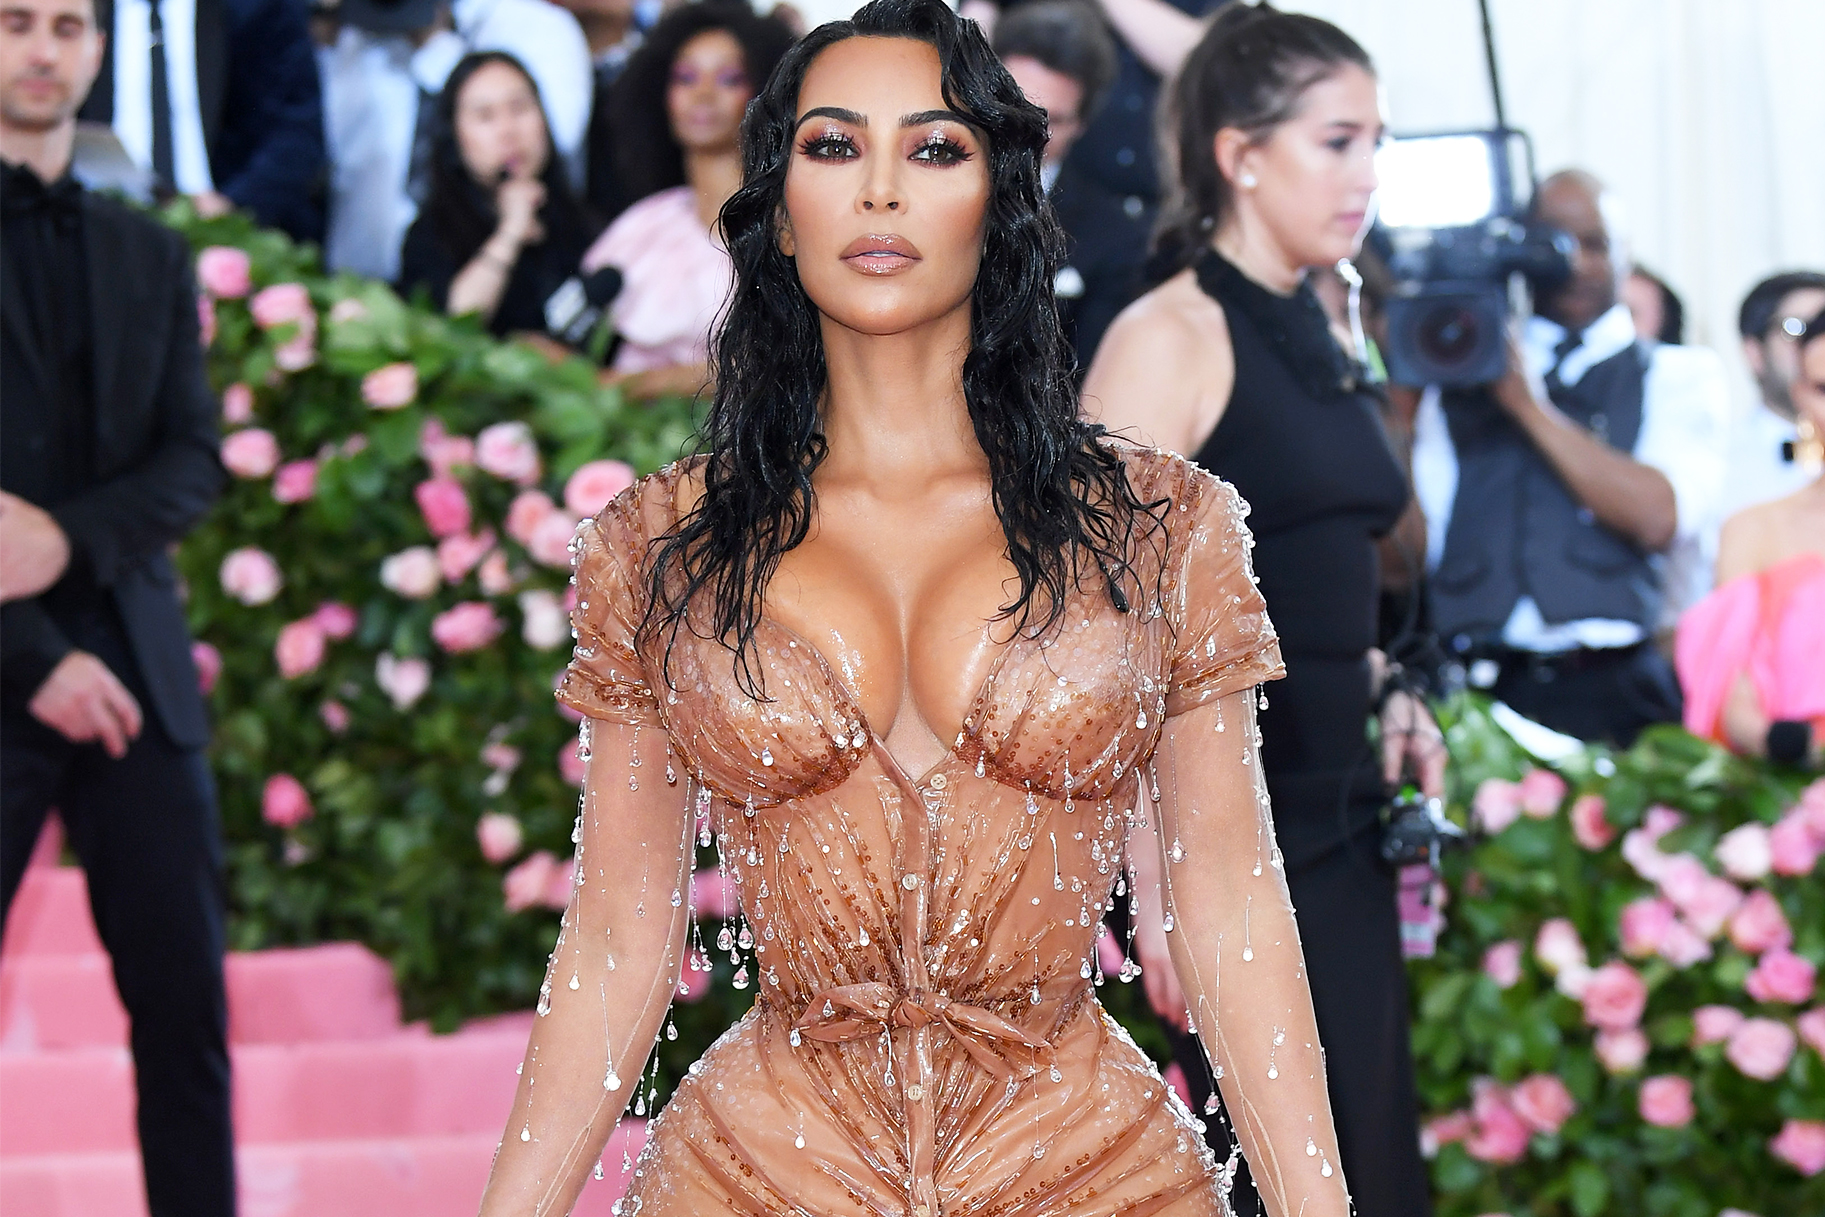 Kim Kardashian has made her grand entrance to the 2019 Met Gala, wearing a skin-tight dress nude dress that may or may not defy the laws of physics. The reality star showed up to the event wearing a nude, body-hugging Mugler dress that made her waist nearly invisible, dripping in beads and sequins. Her husband Kanye West, on the other hand, laid low in a black jacket and pants.